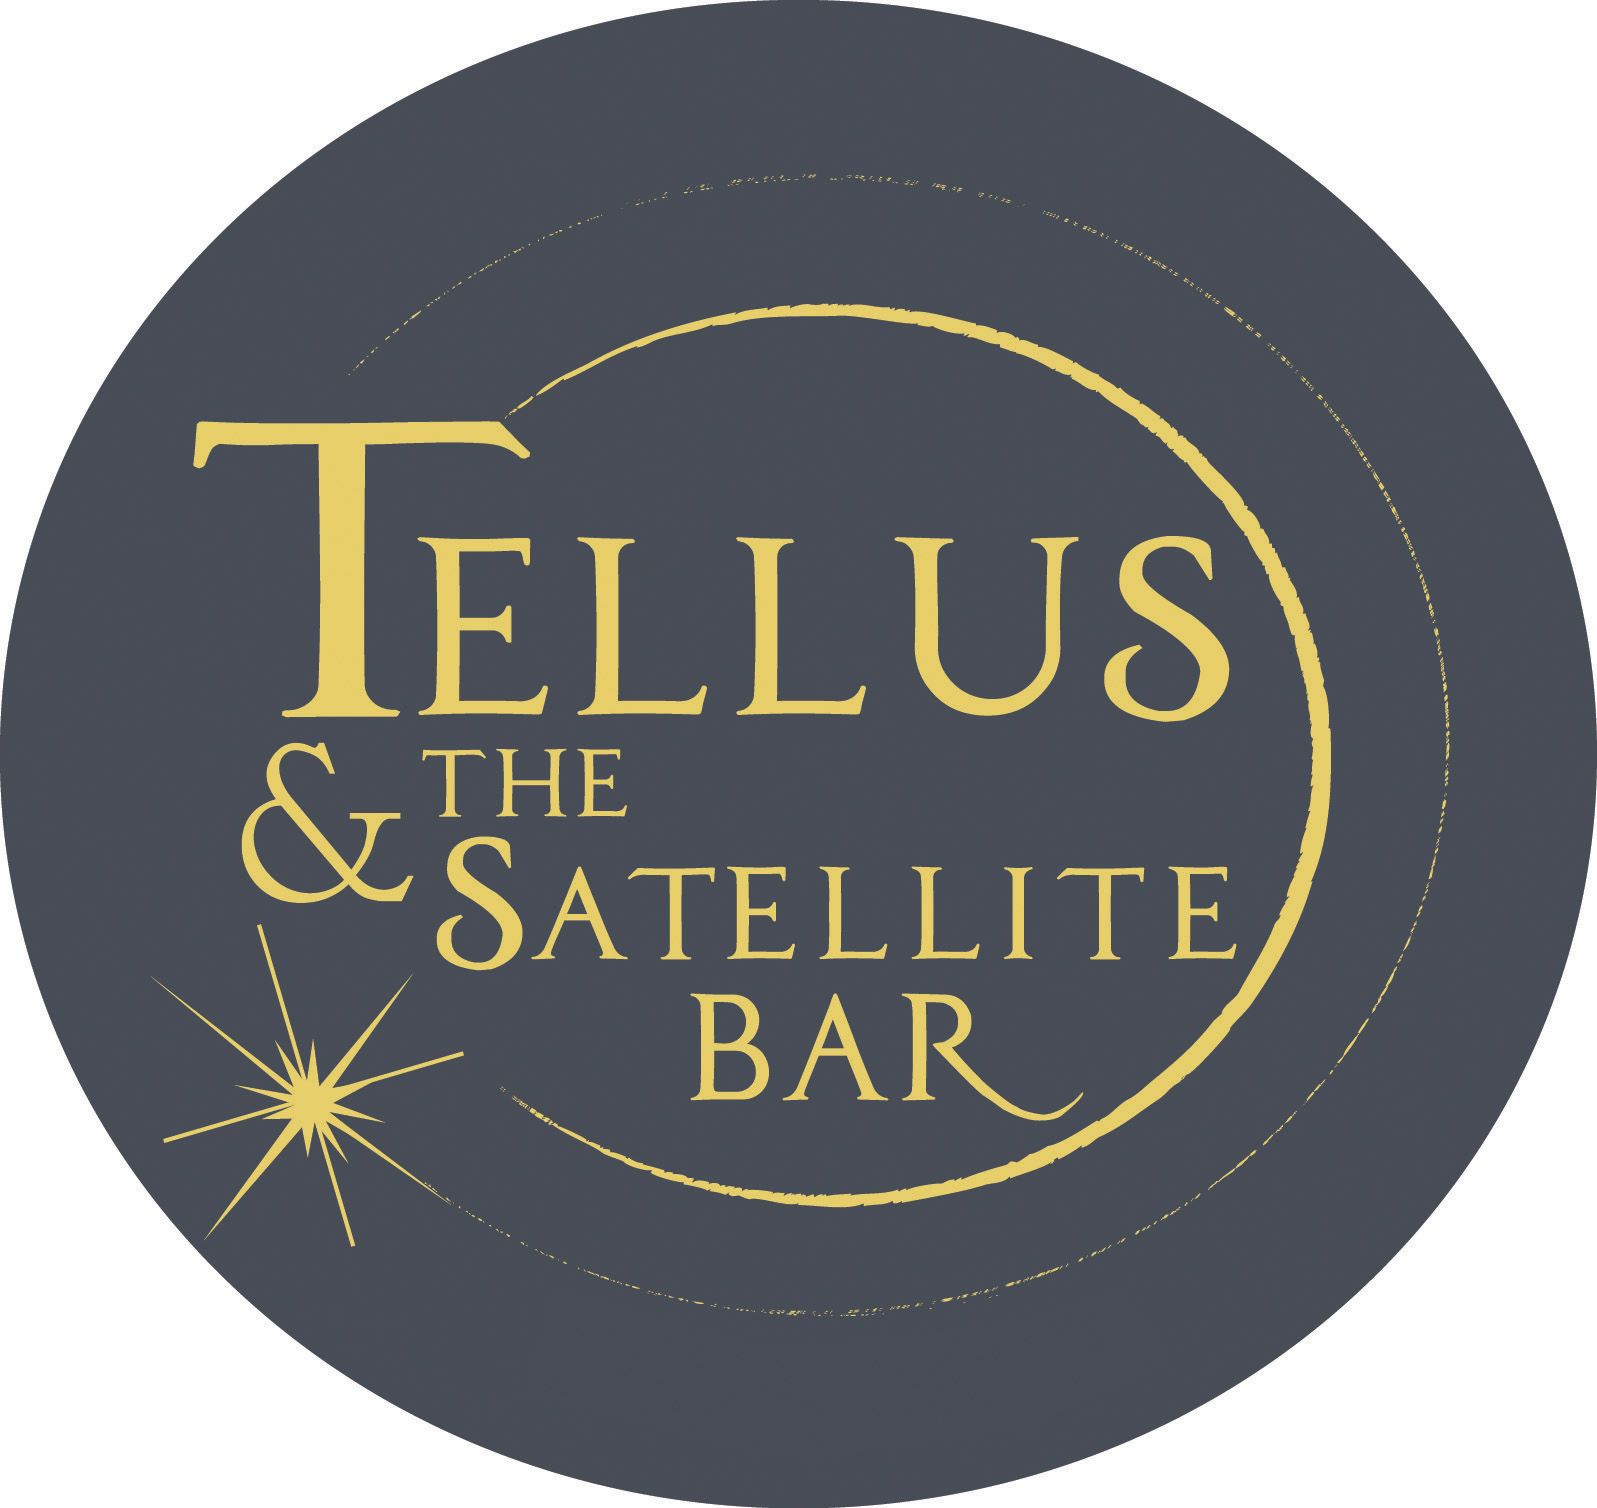 Tellus & the Satellite Bar is a restaurant in Thornes Marketplace Northampton MA and bar/nightclub featuring an ever-changing, homey menu and plenty of great cocktails.